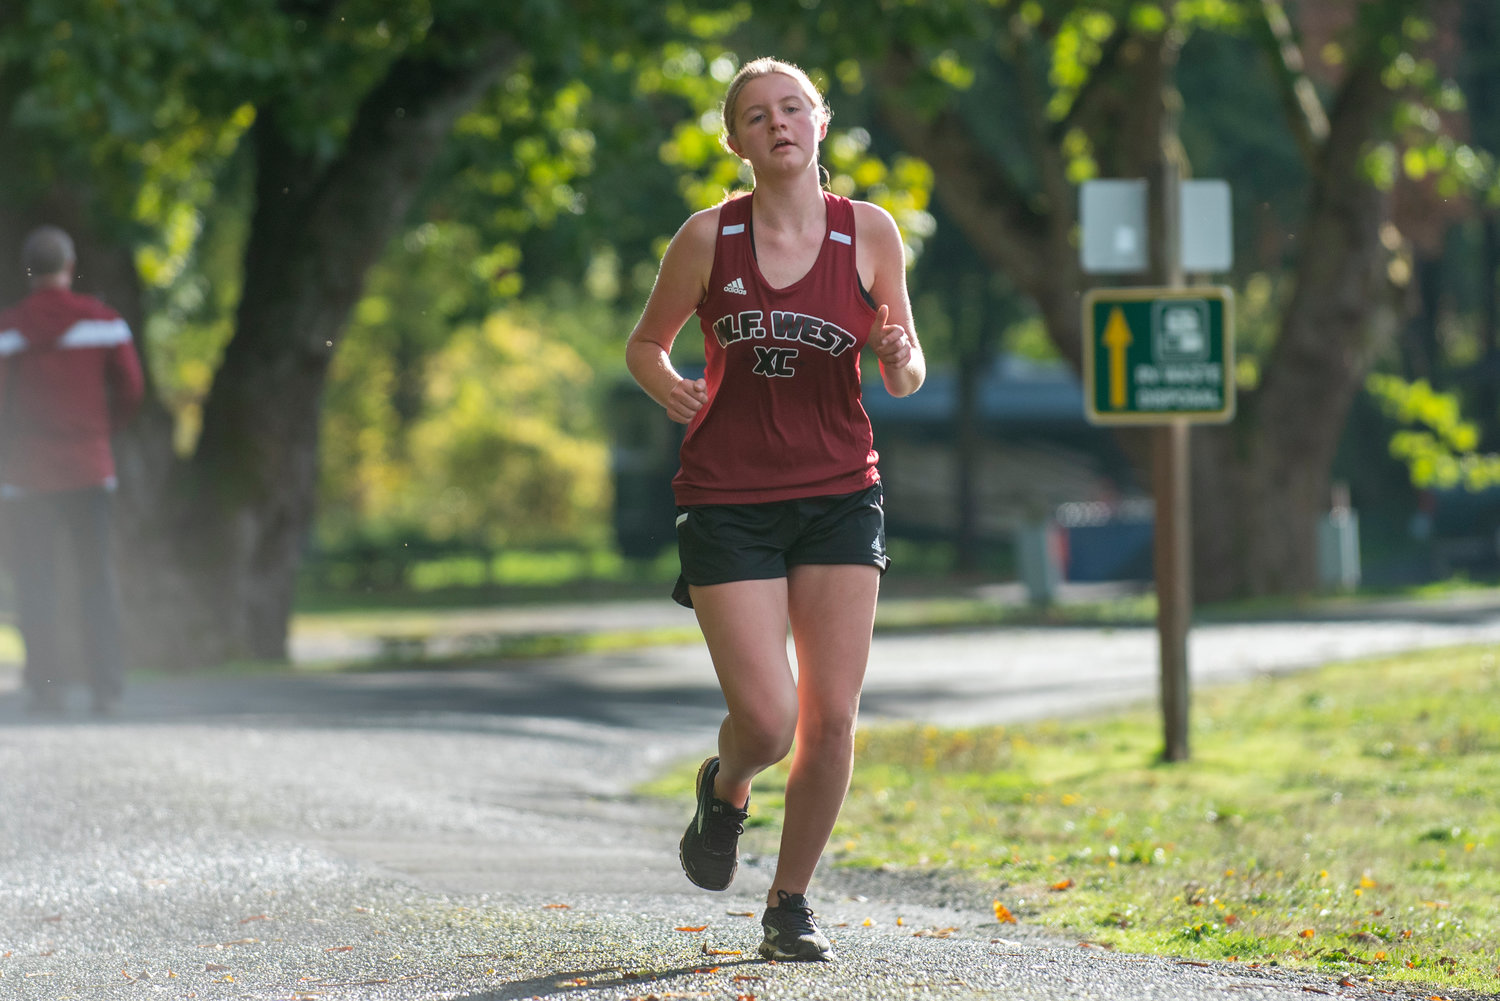 W.F. West's Brooke Johnston races in a dual meet at Stan Hedwall Park on Oct. 6, 2021.